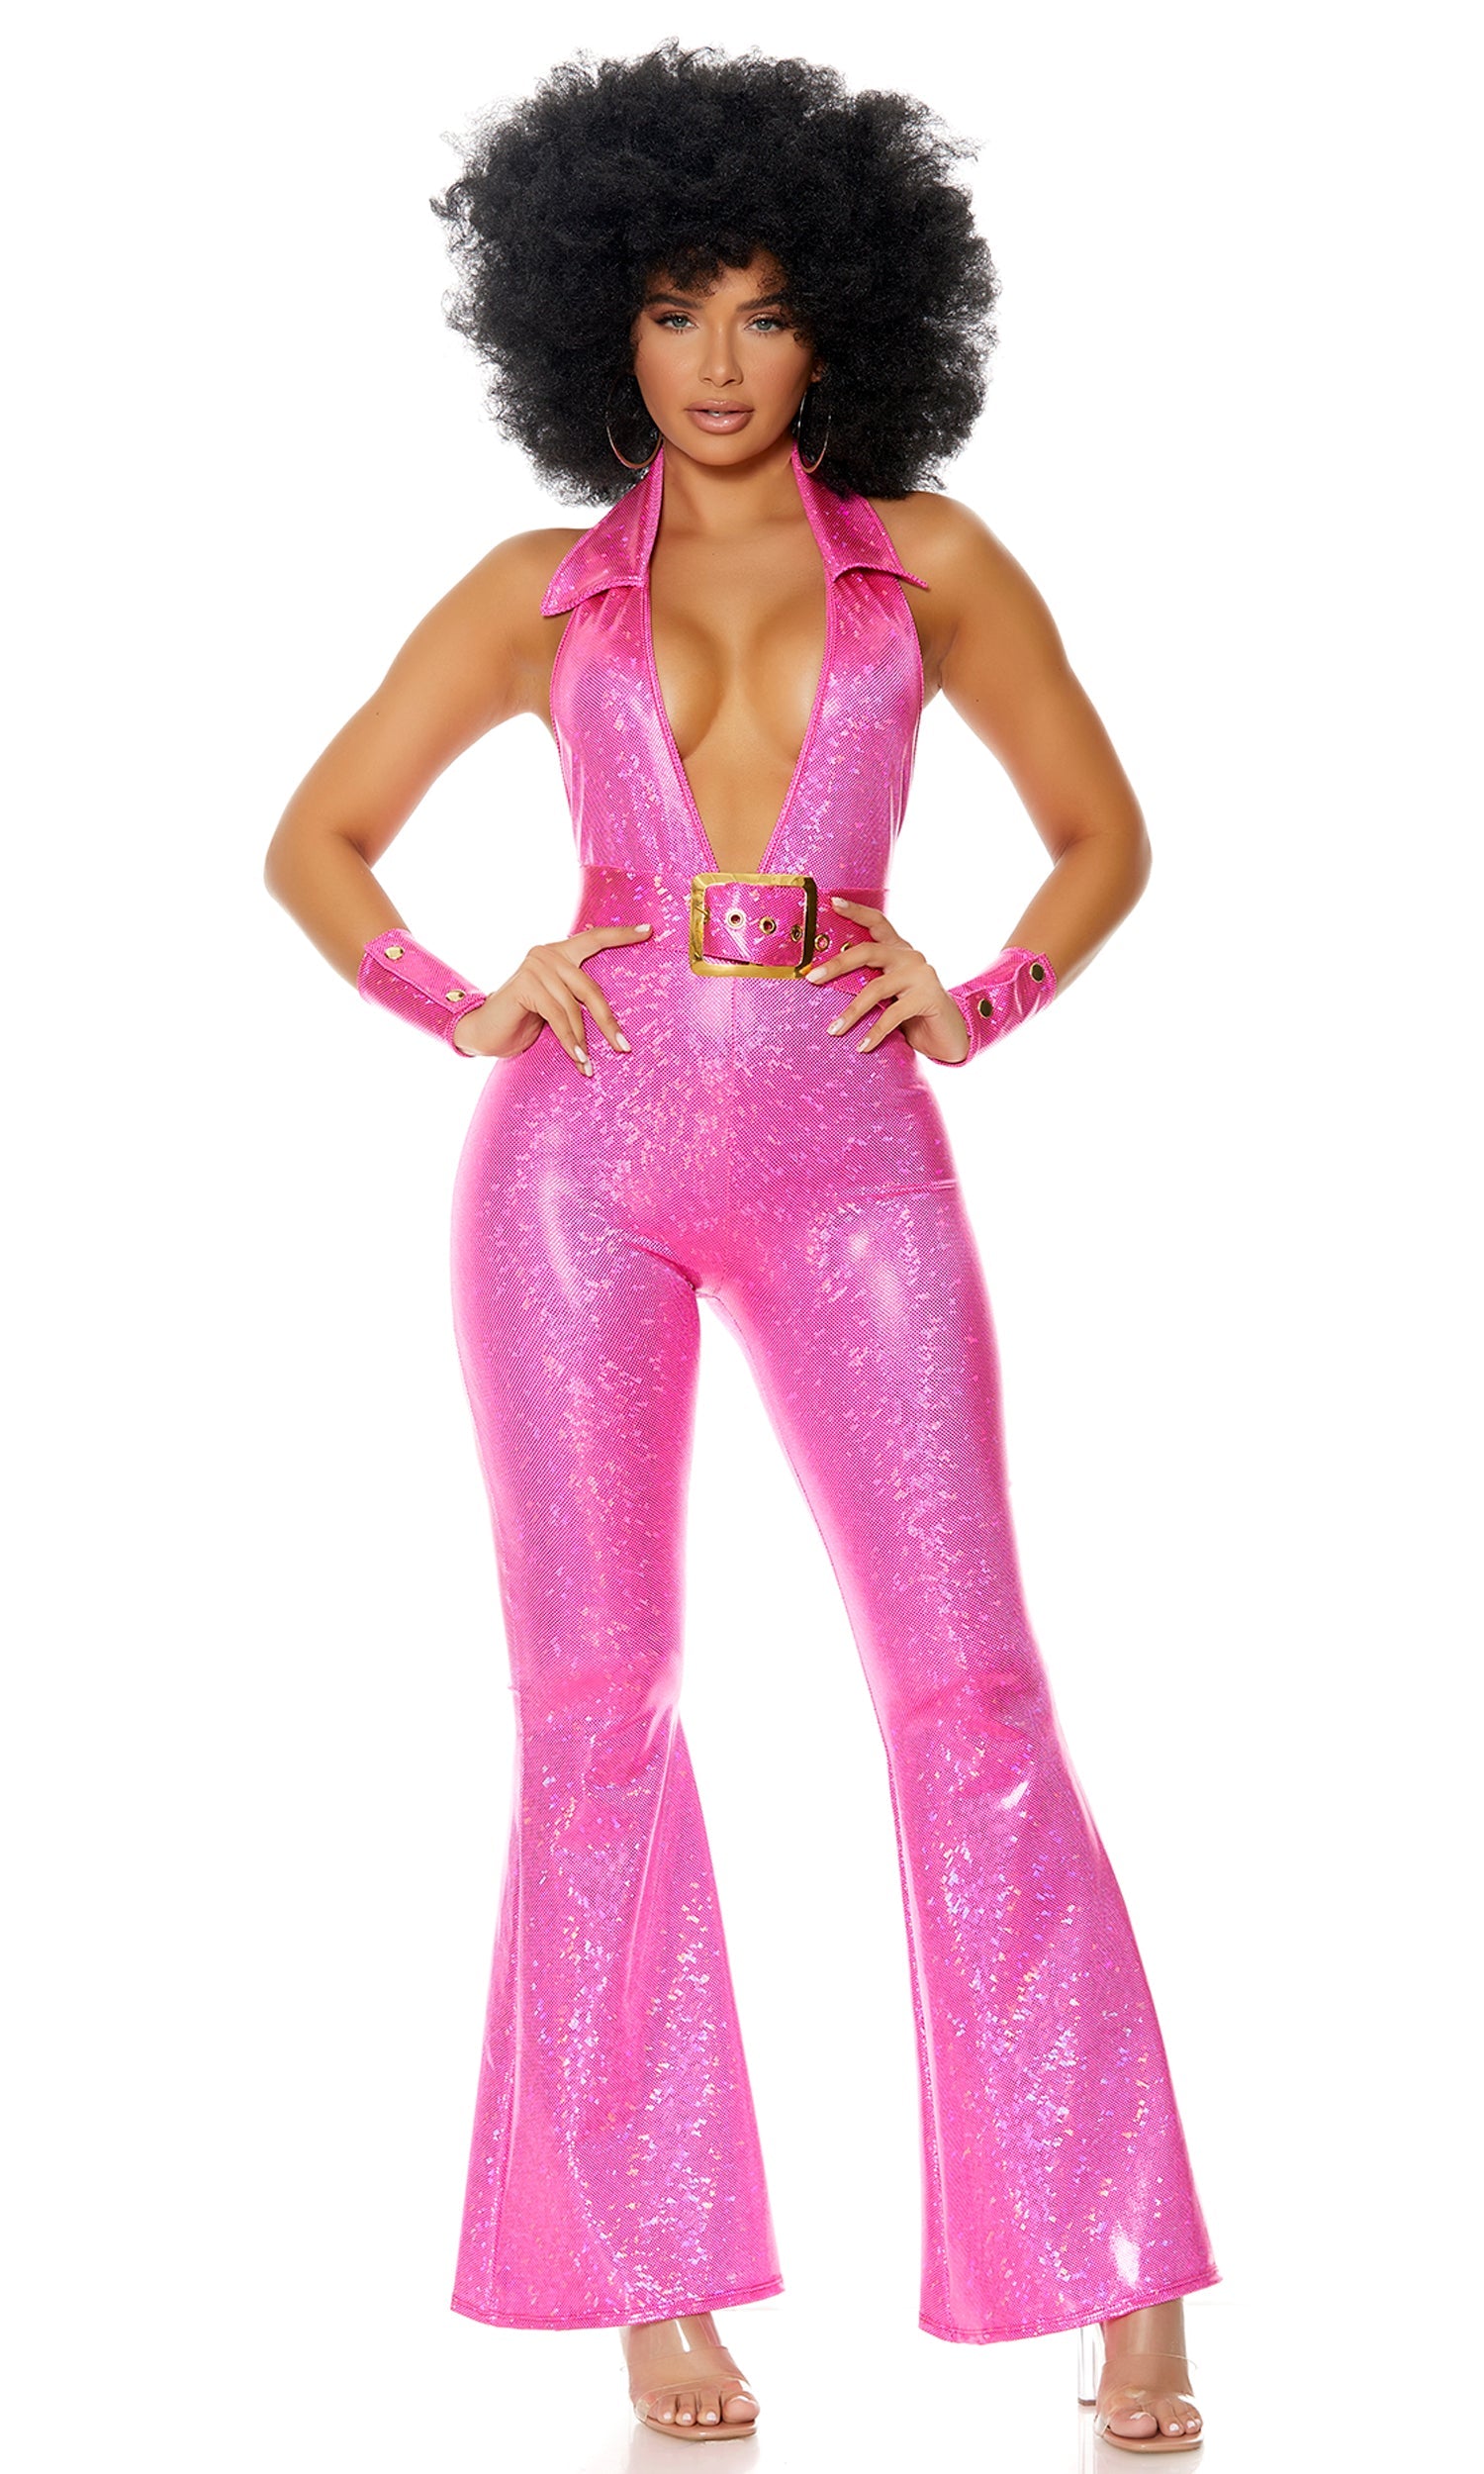 Foxy Lady Disco Woman Costume by Forplay Costumes only at  Tdcostumes.com